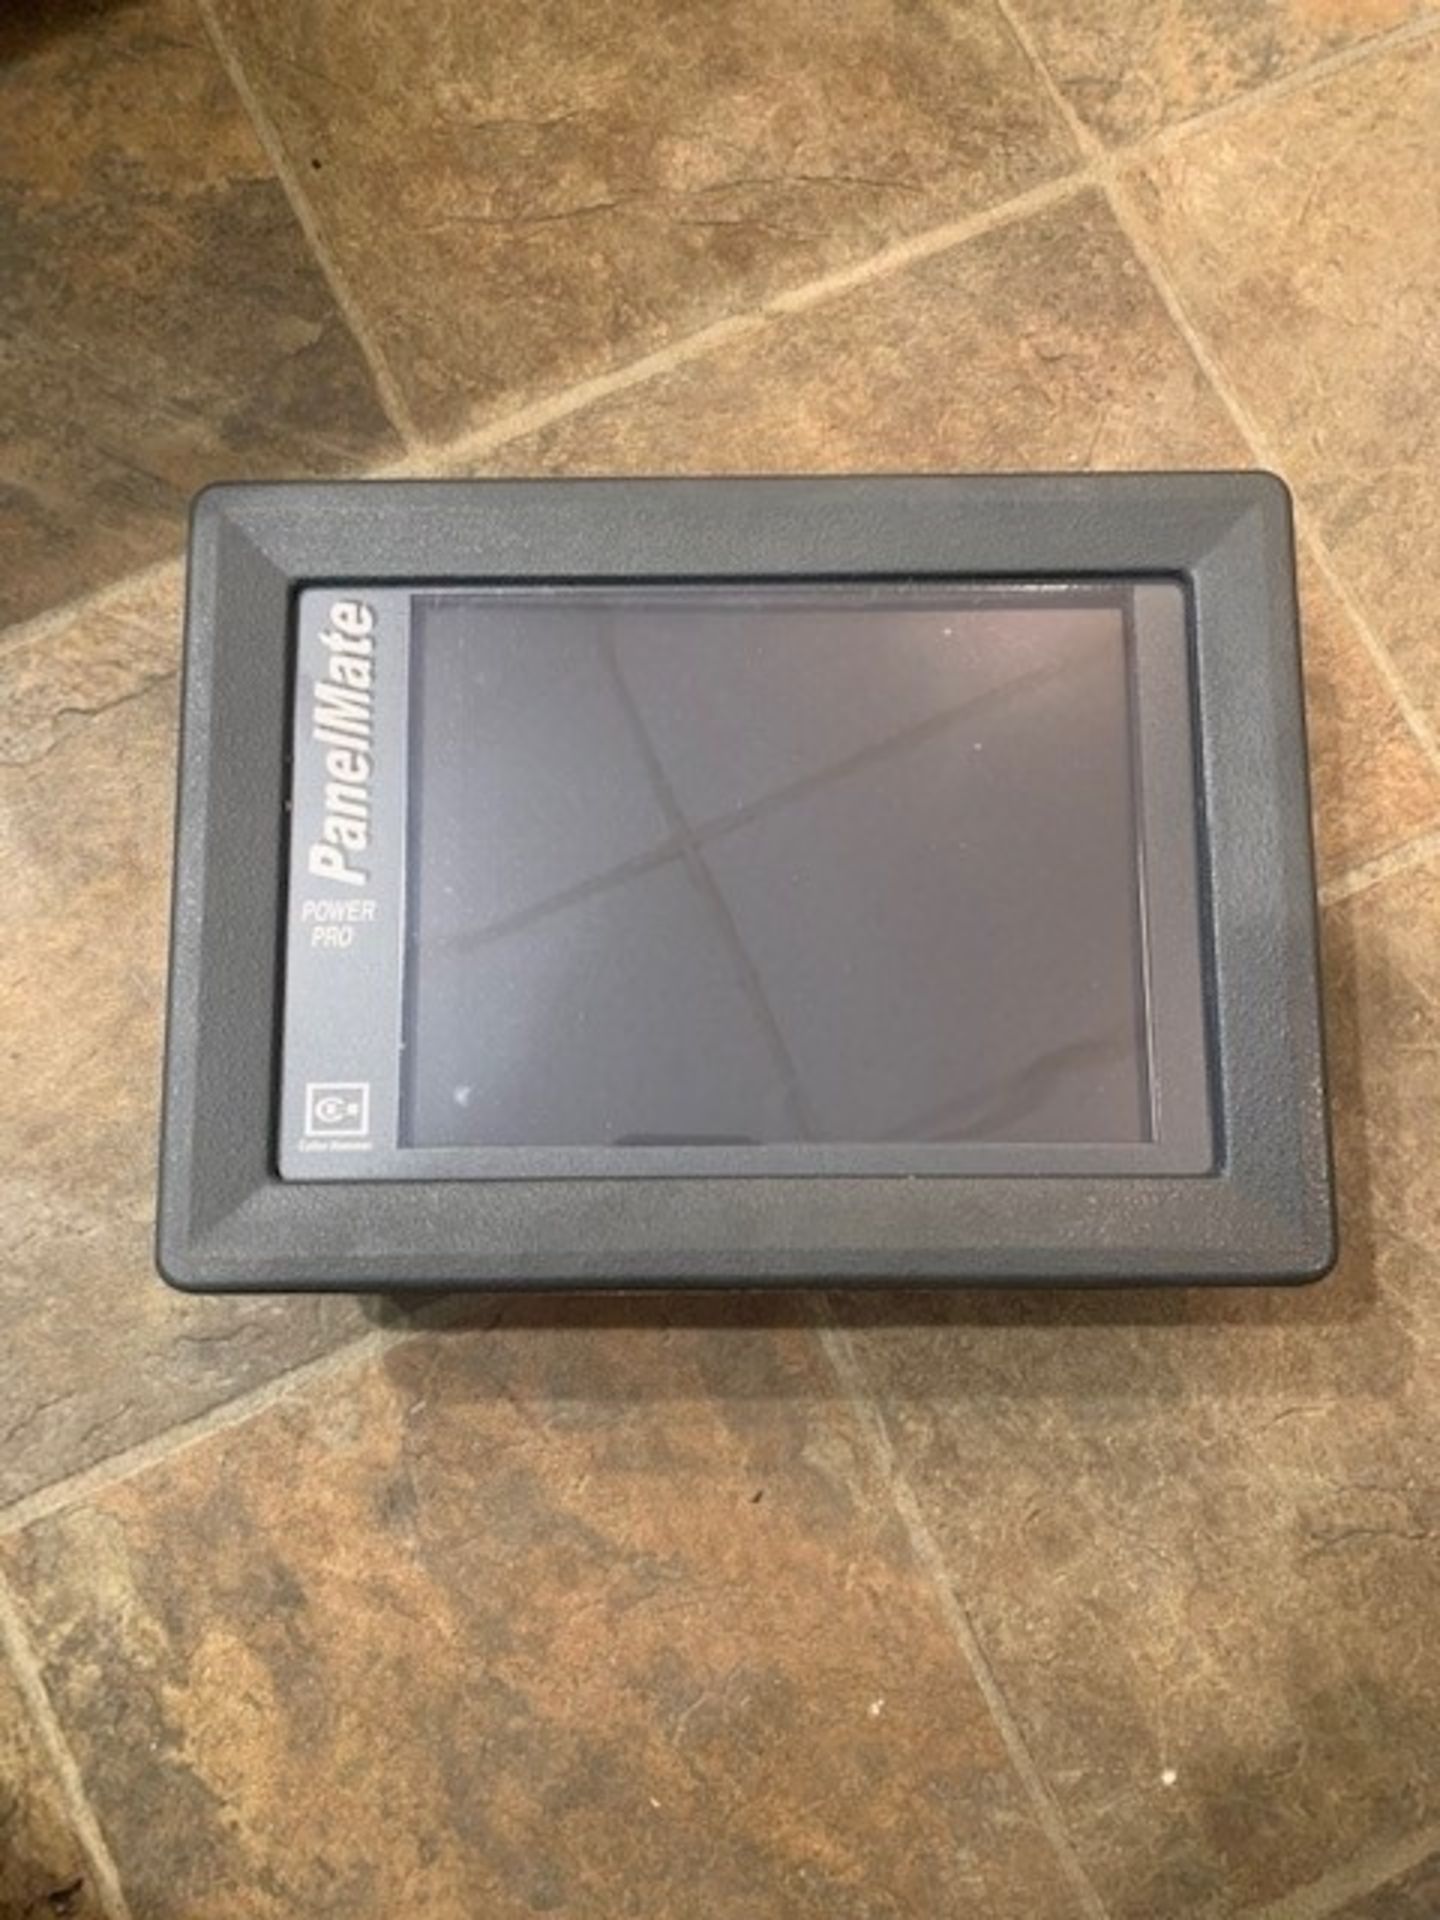 Cutler Hammer Panelmate Touchpad Display, Model 1785T PmPP 1700, S/N 41010-001, Fits Opening Size